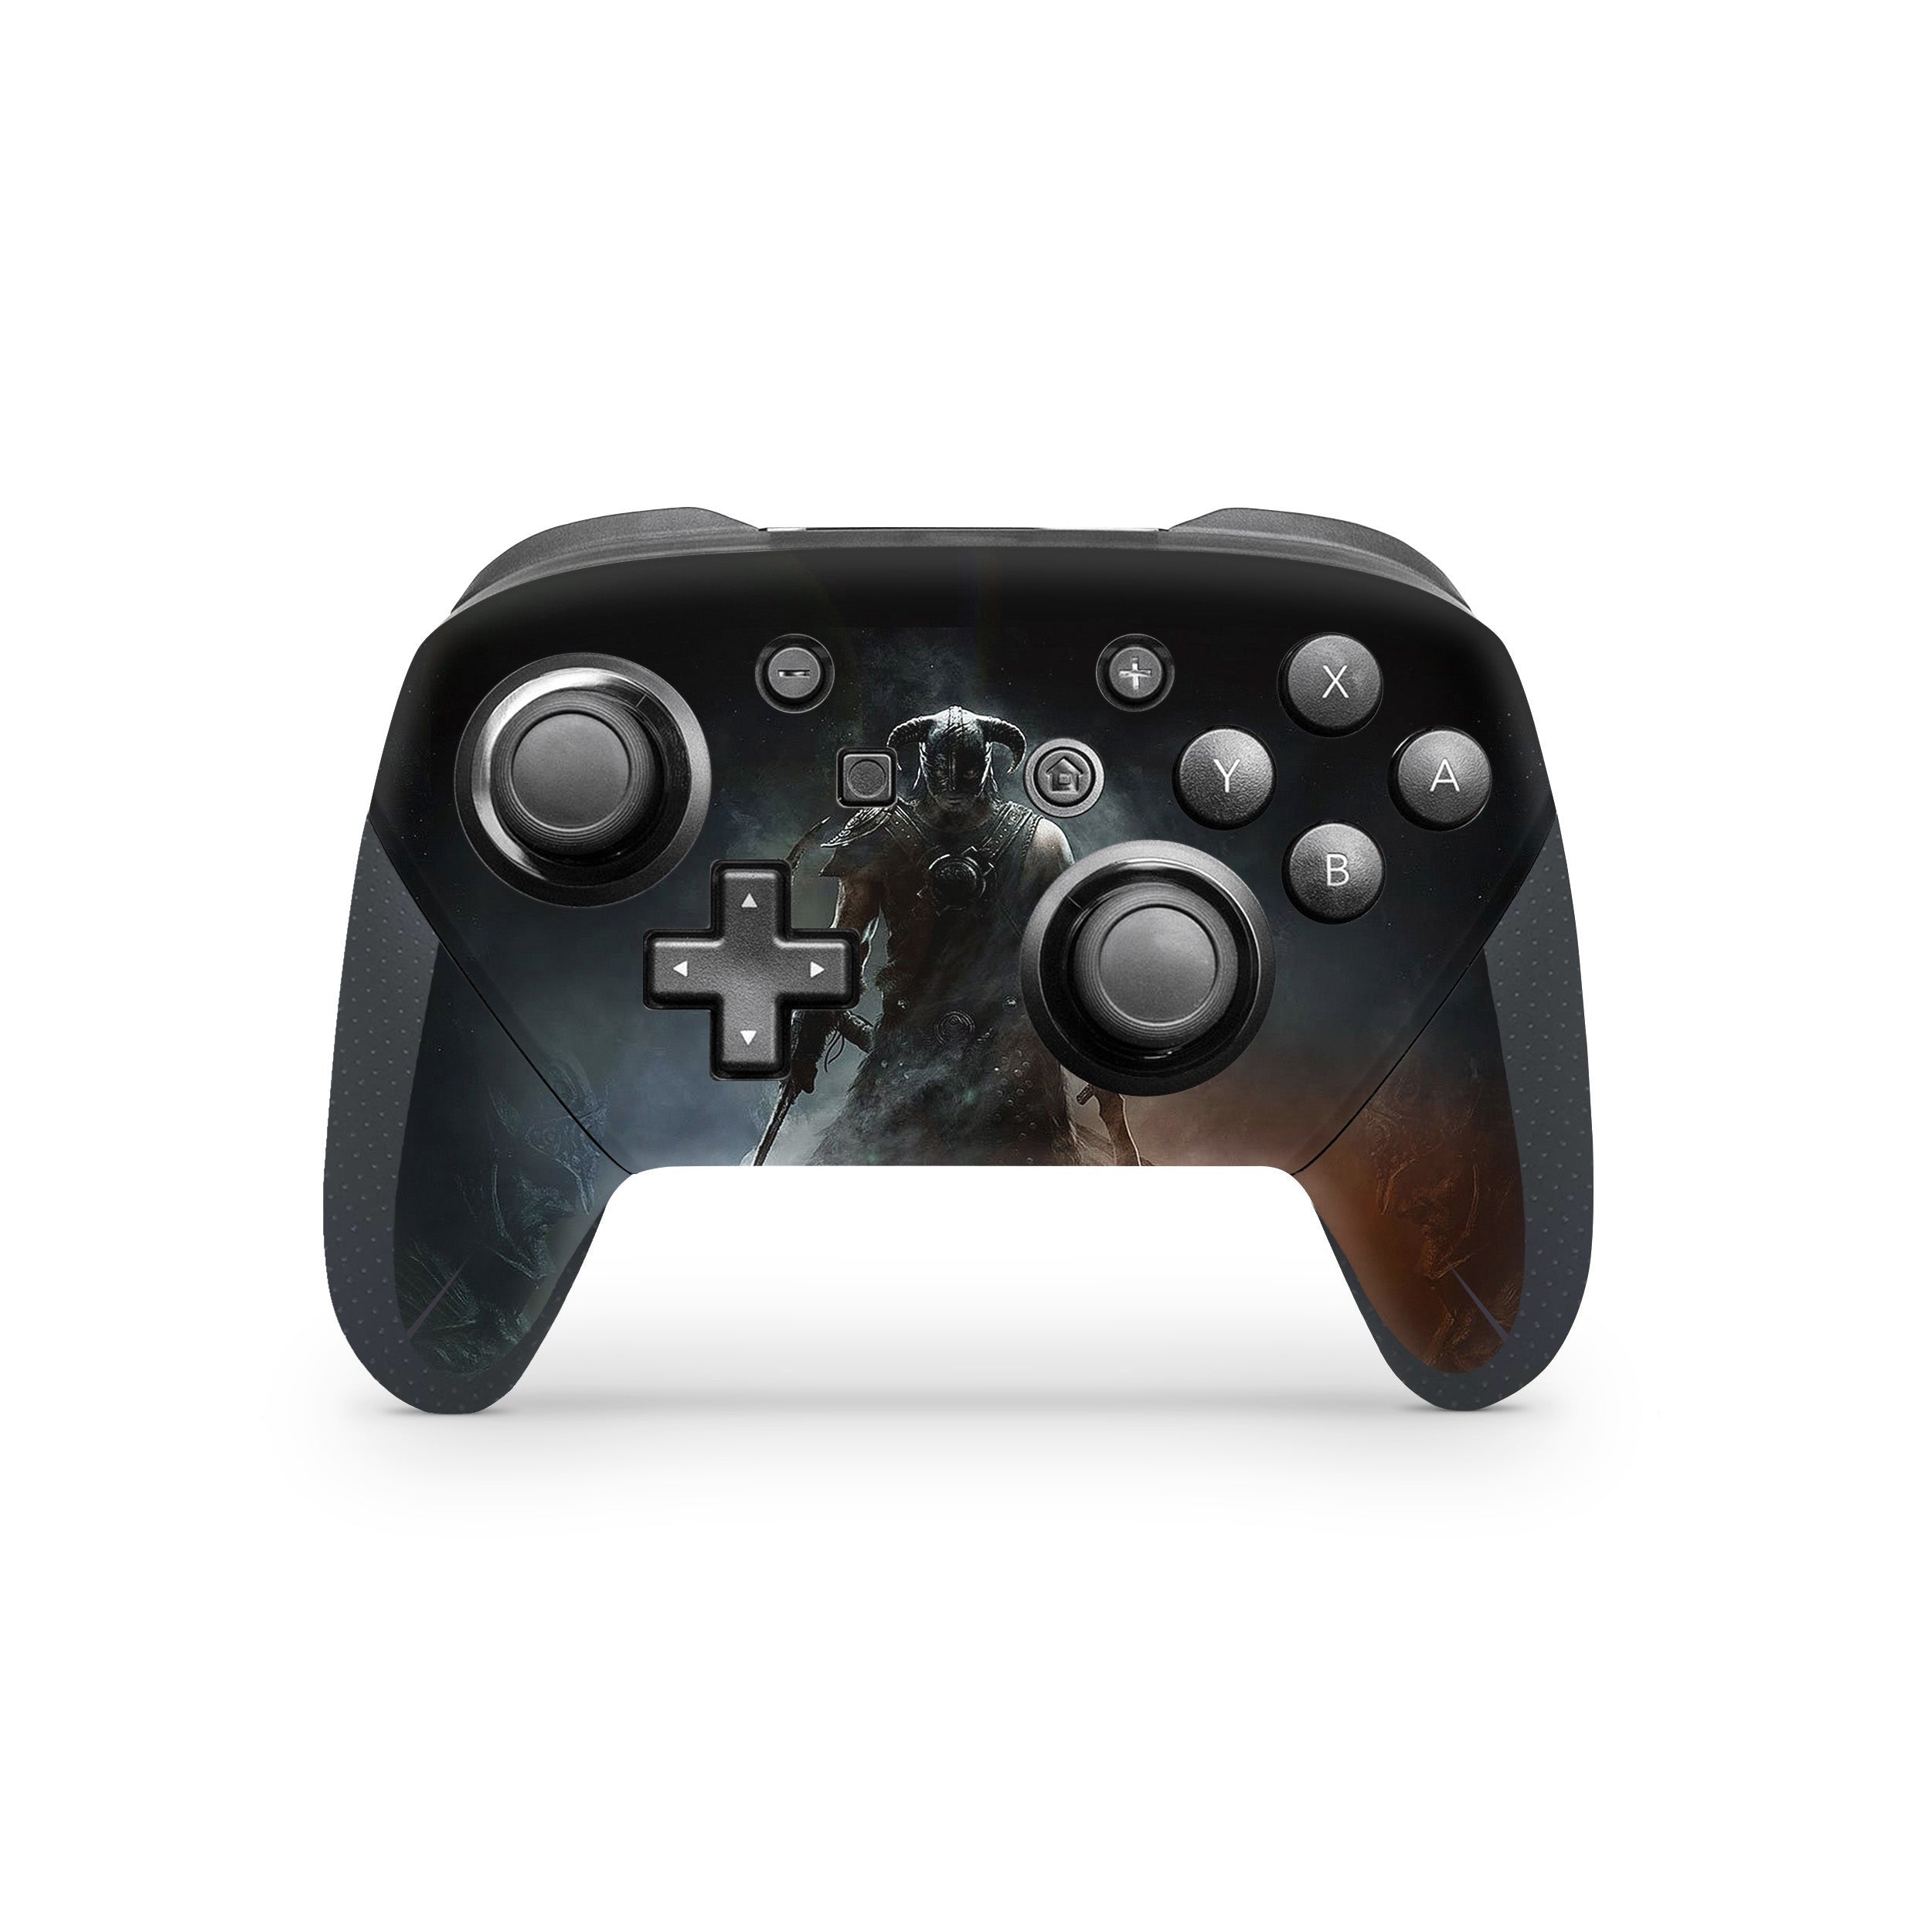 A video game skin featuring a The Elder Scrolls 4 Skyrim design for the Switch Pro Controller.